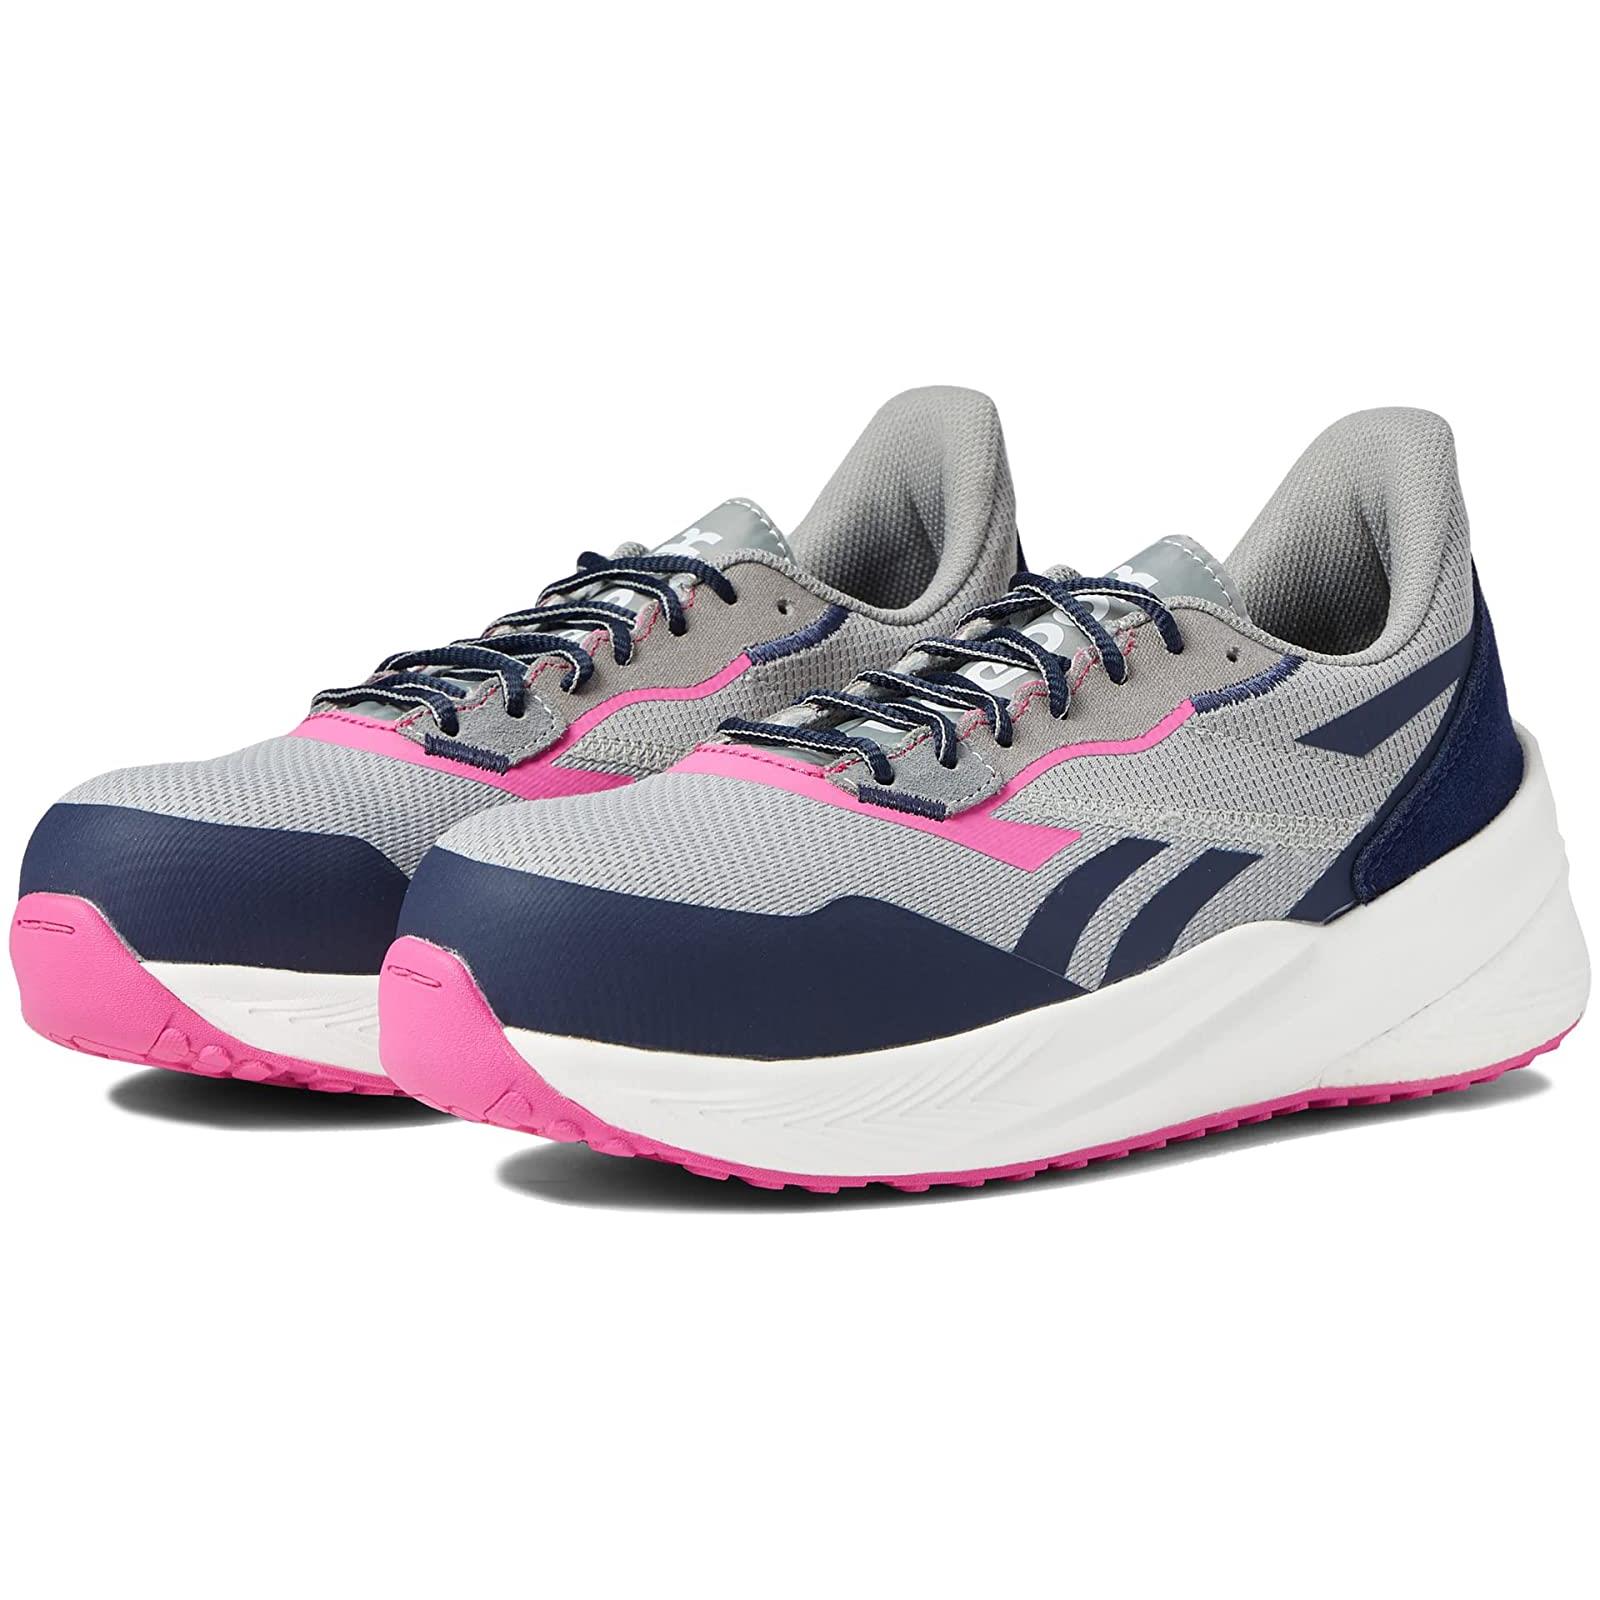 Woman`s Shoes Reebok Work Floatride Energy Daily Work SD10 Comp Toe Gray/Navy/Pink